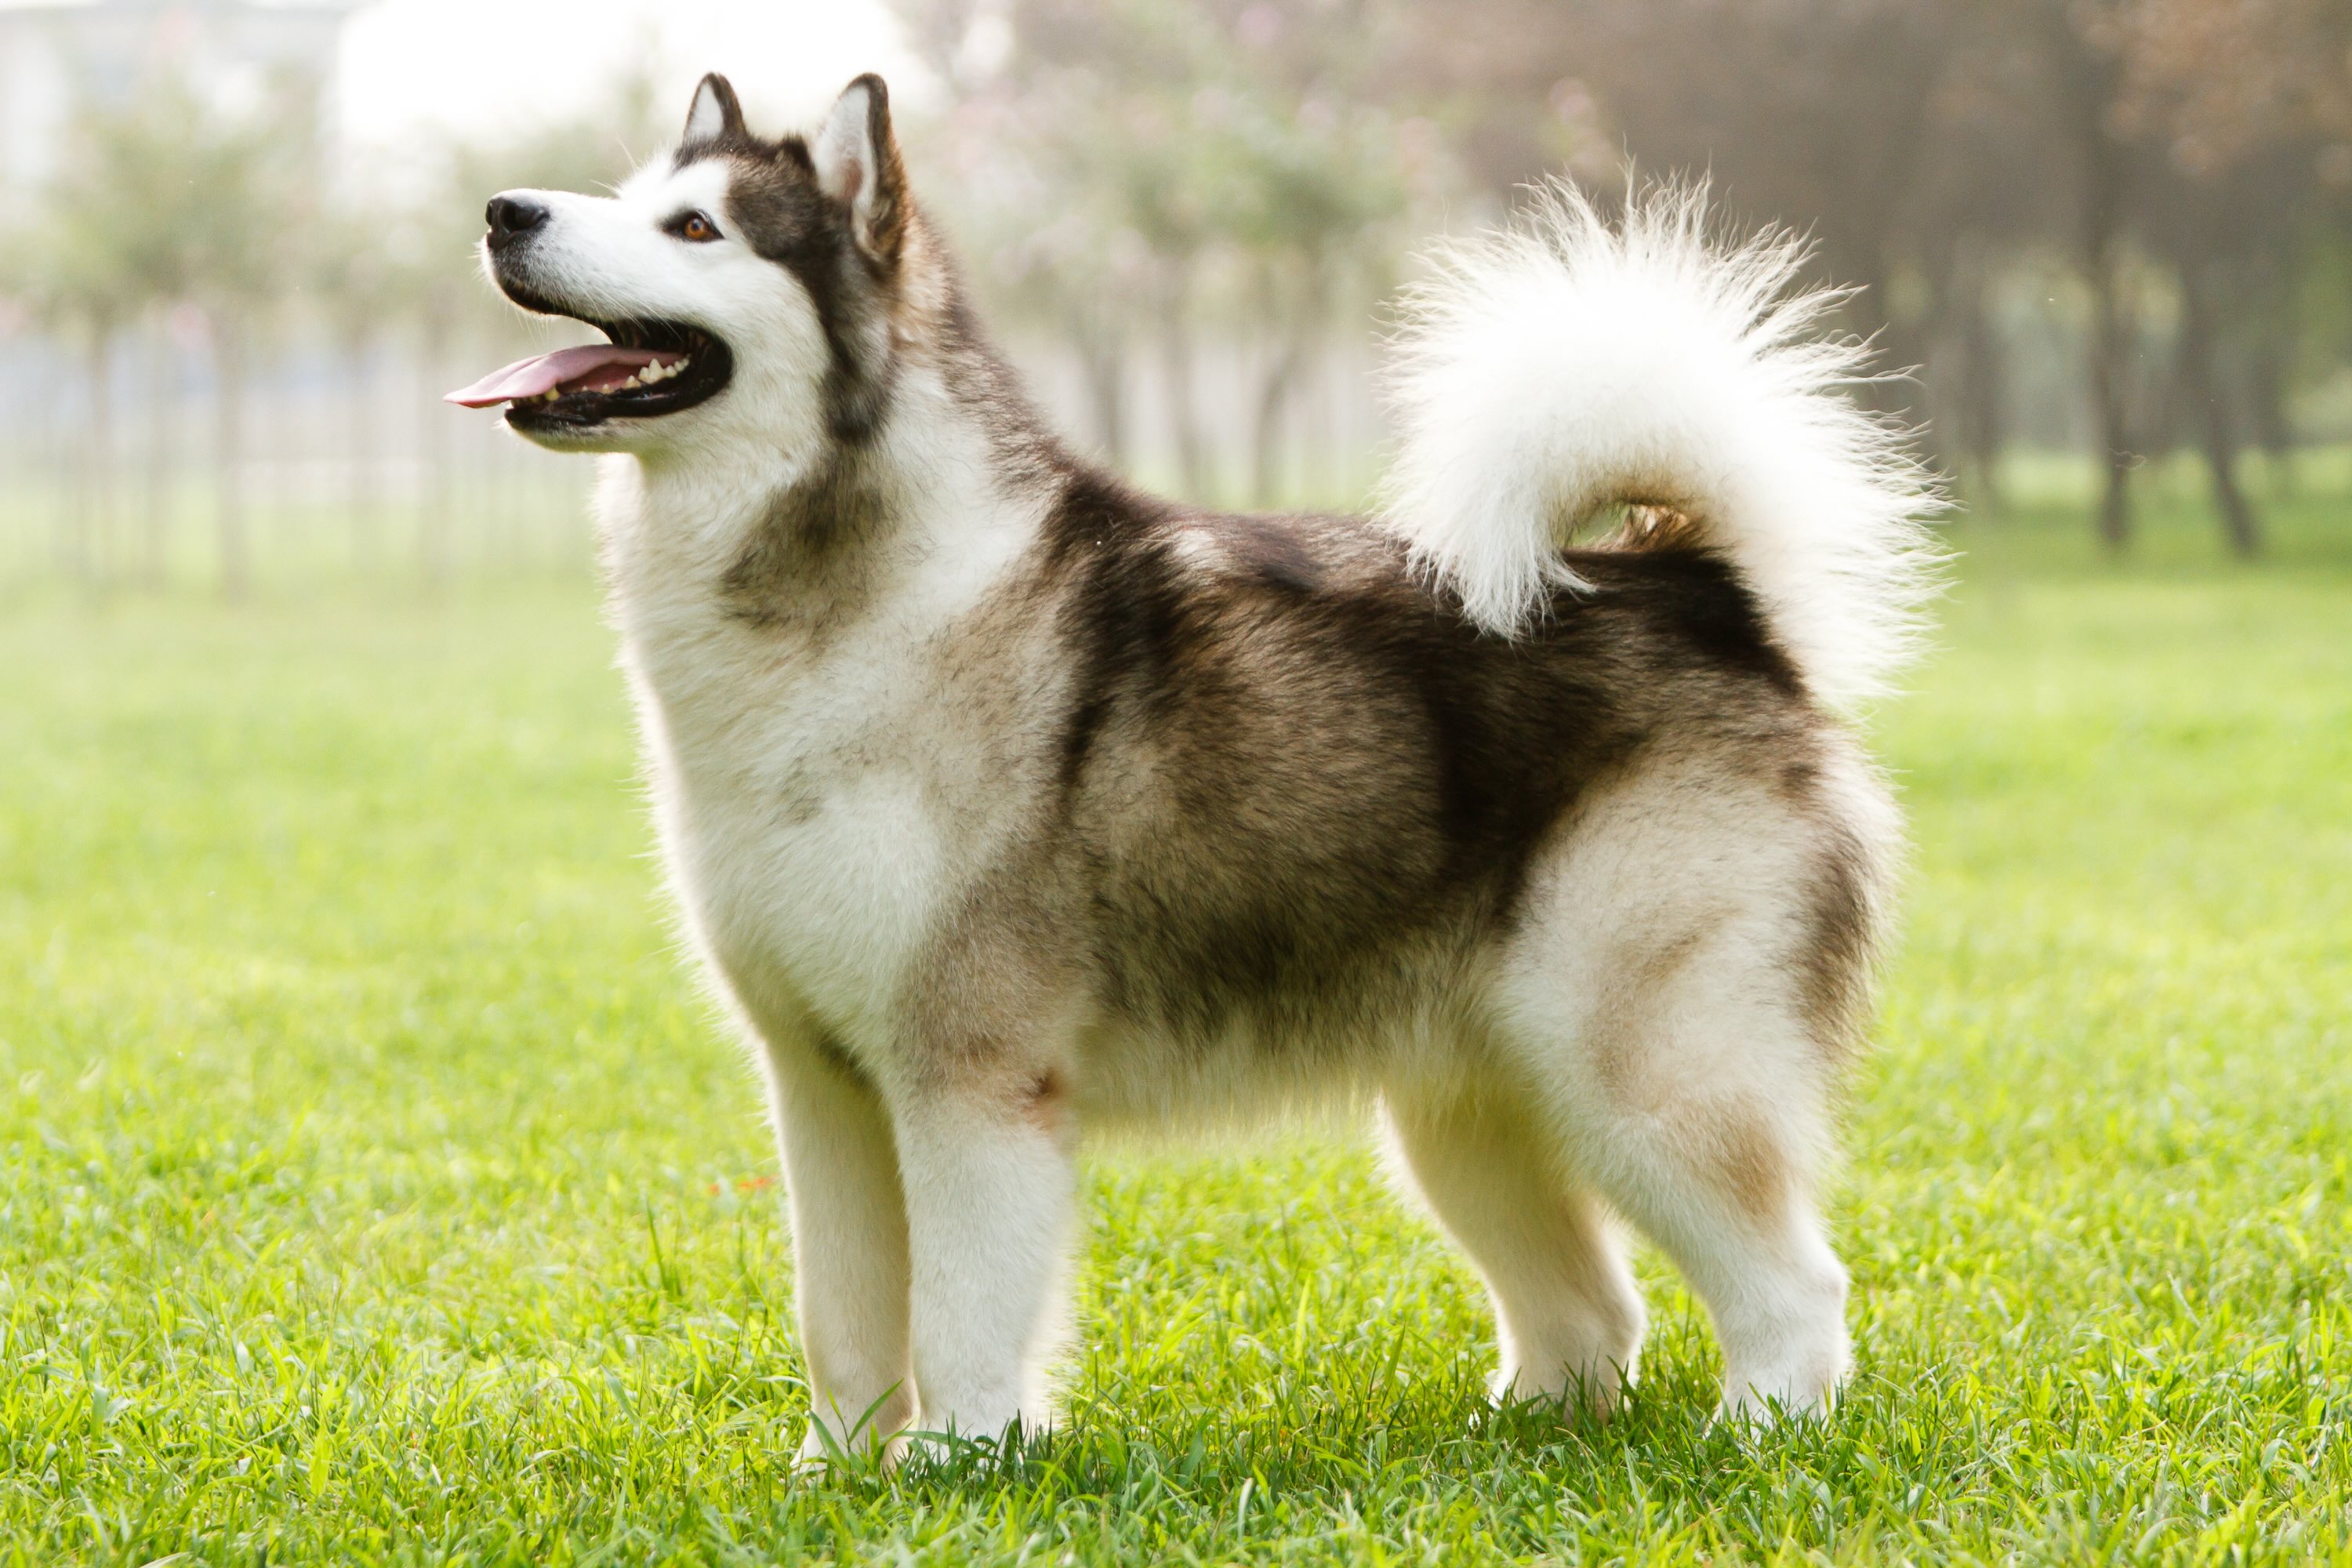 gray and white fluffy alaskan malamute standing in grass and looking up at the sky